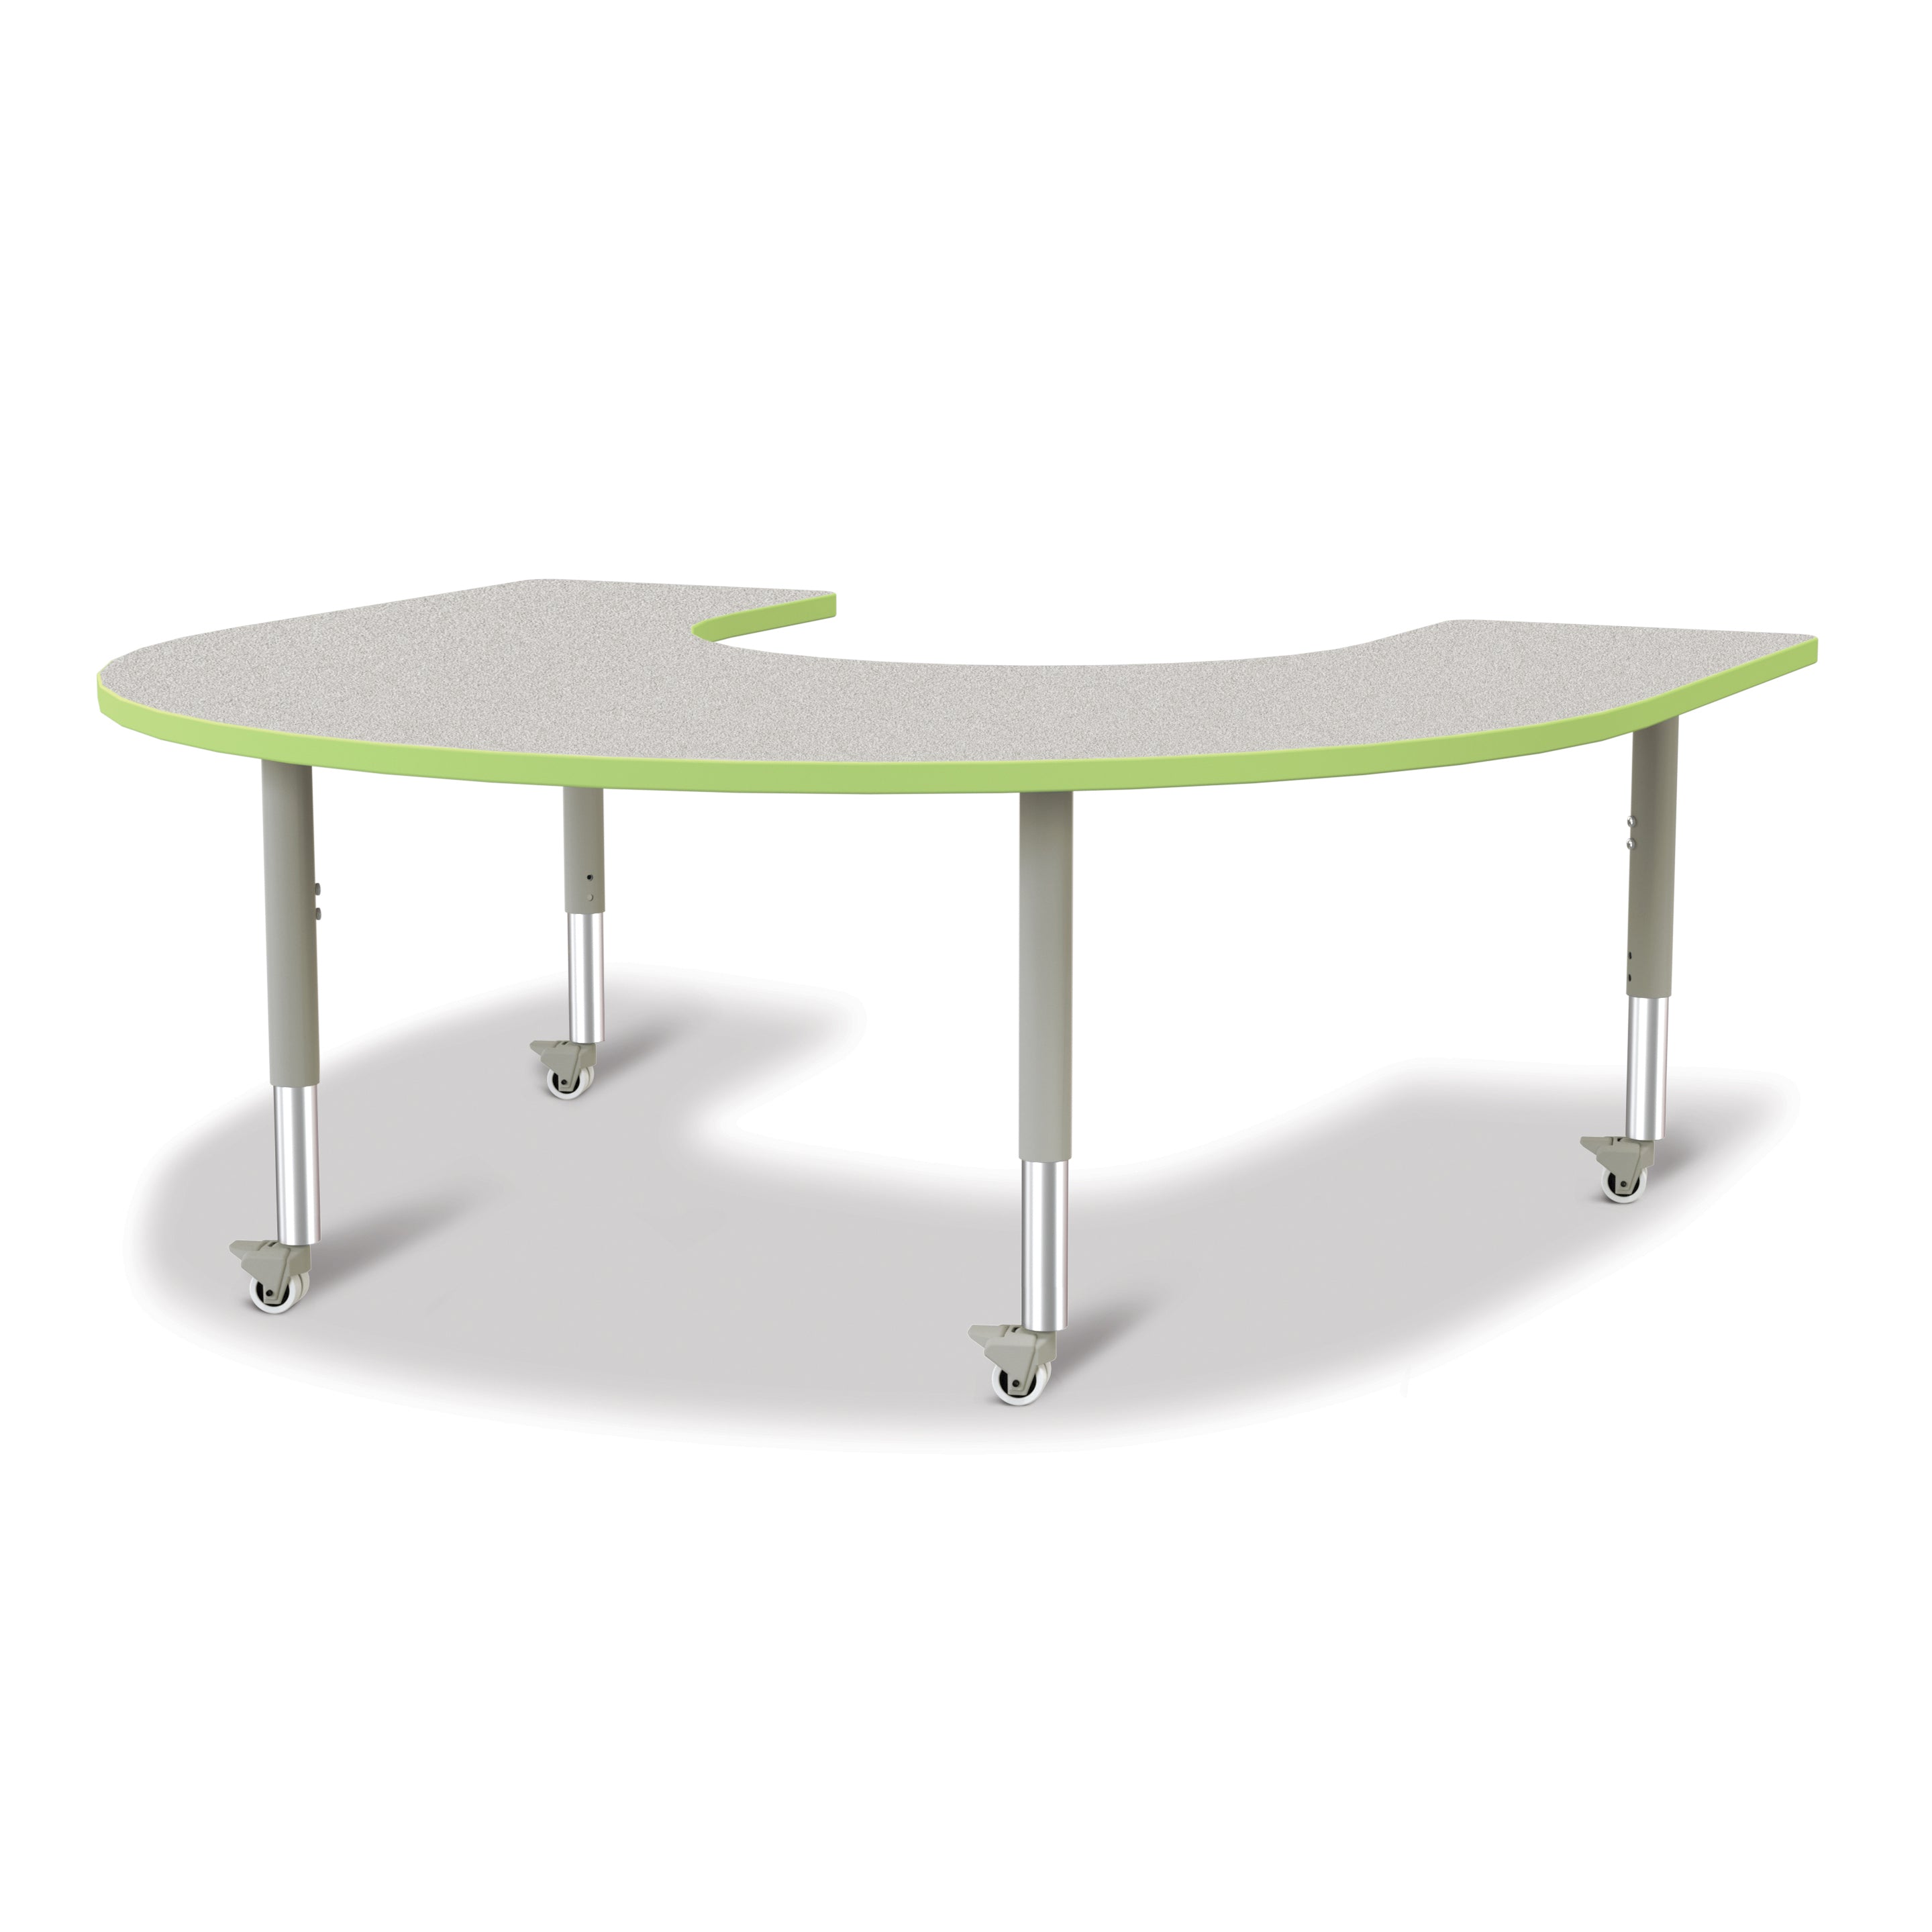 6445JCM130, Berries Horseshoe Activity Table - 66" X 60", Mobile - Freckled Gray/Key Lime/Gray